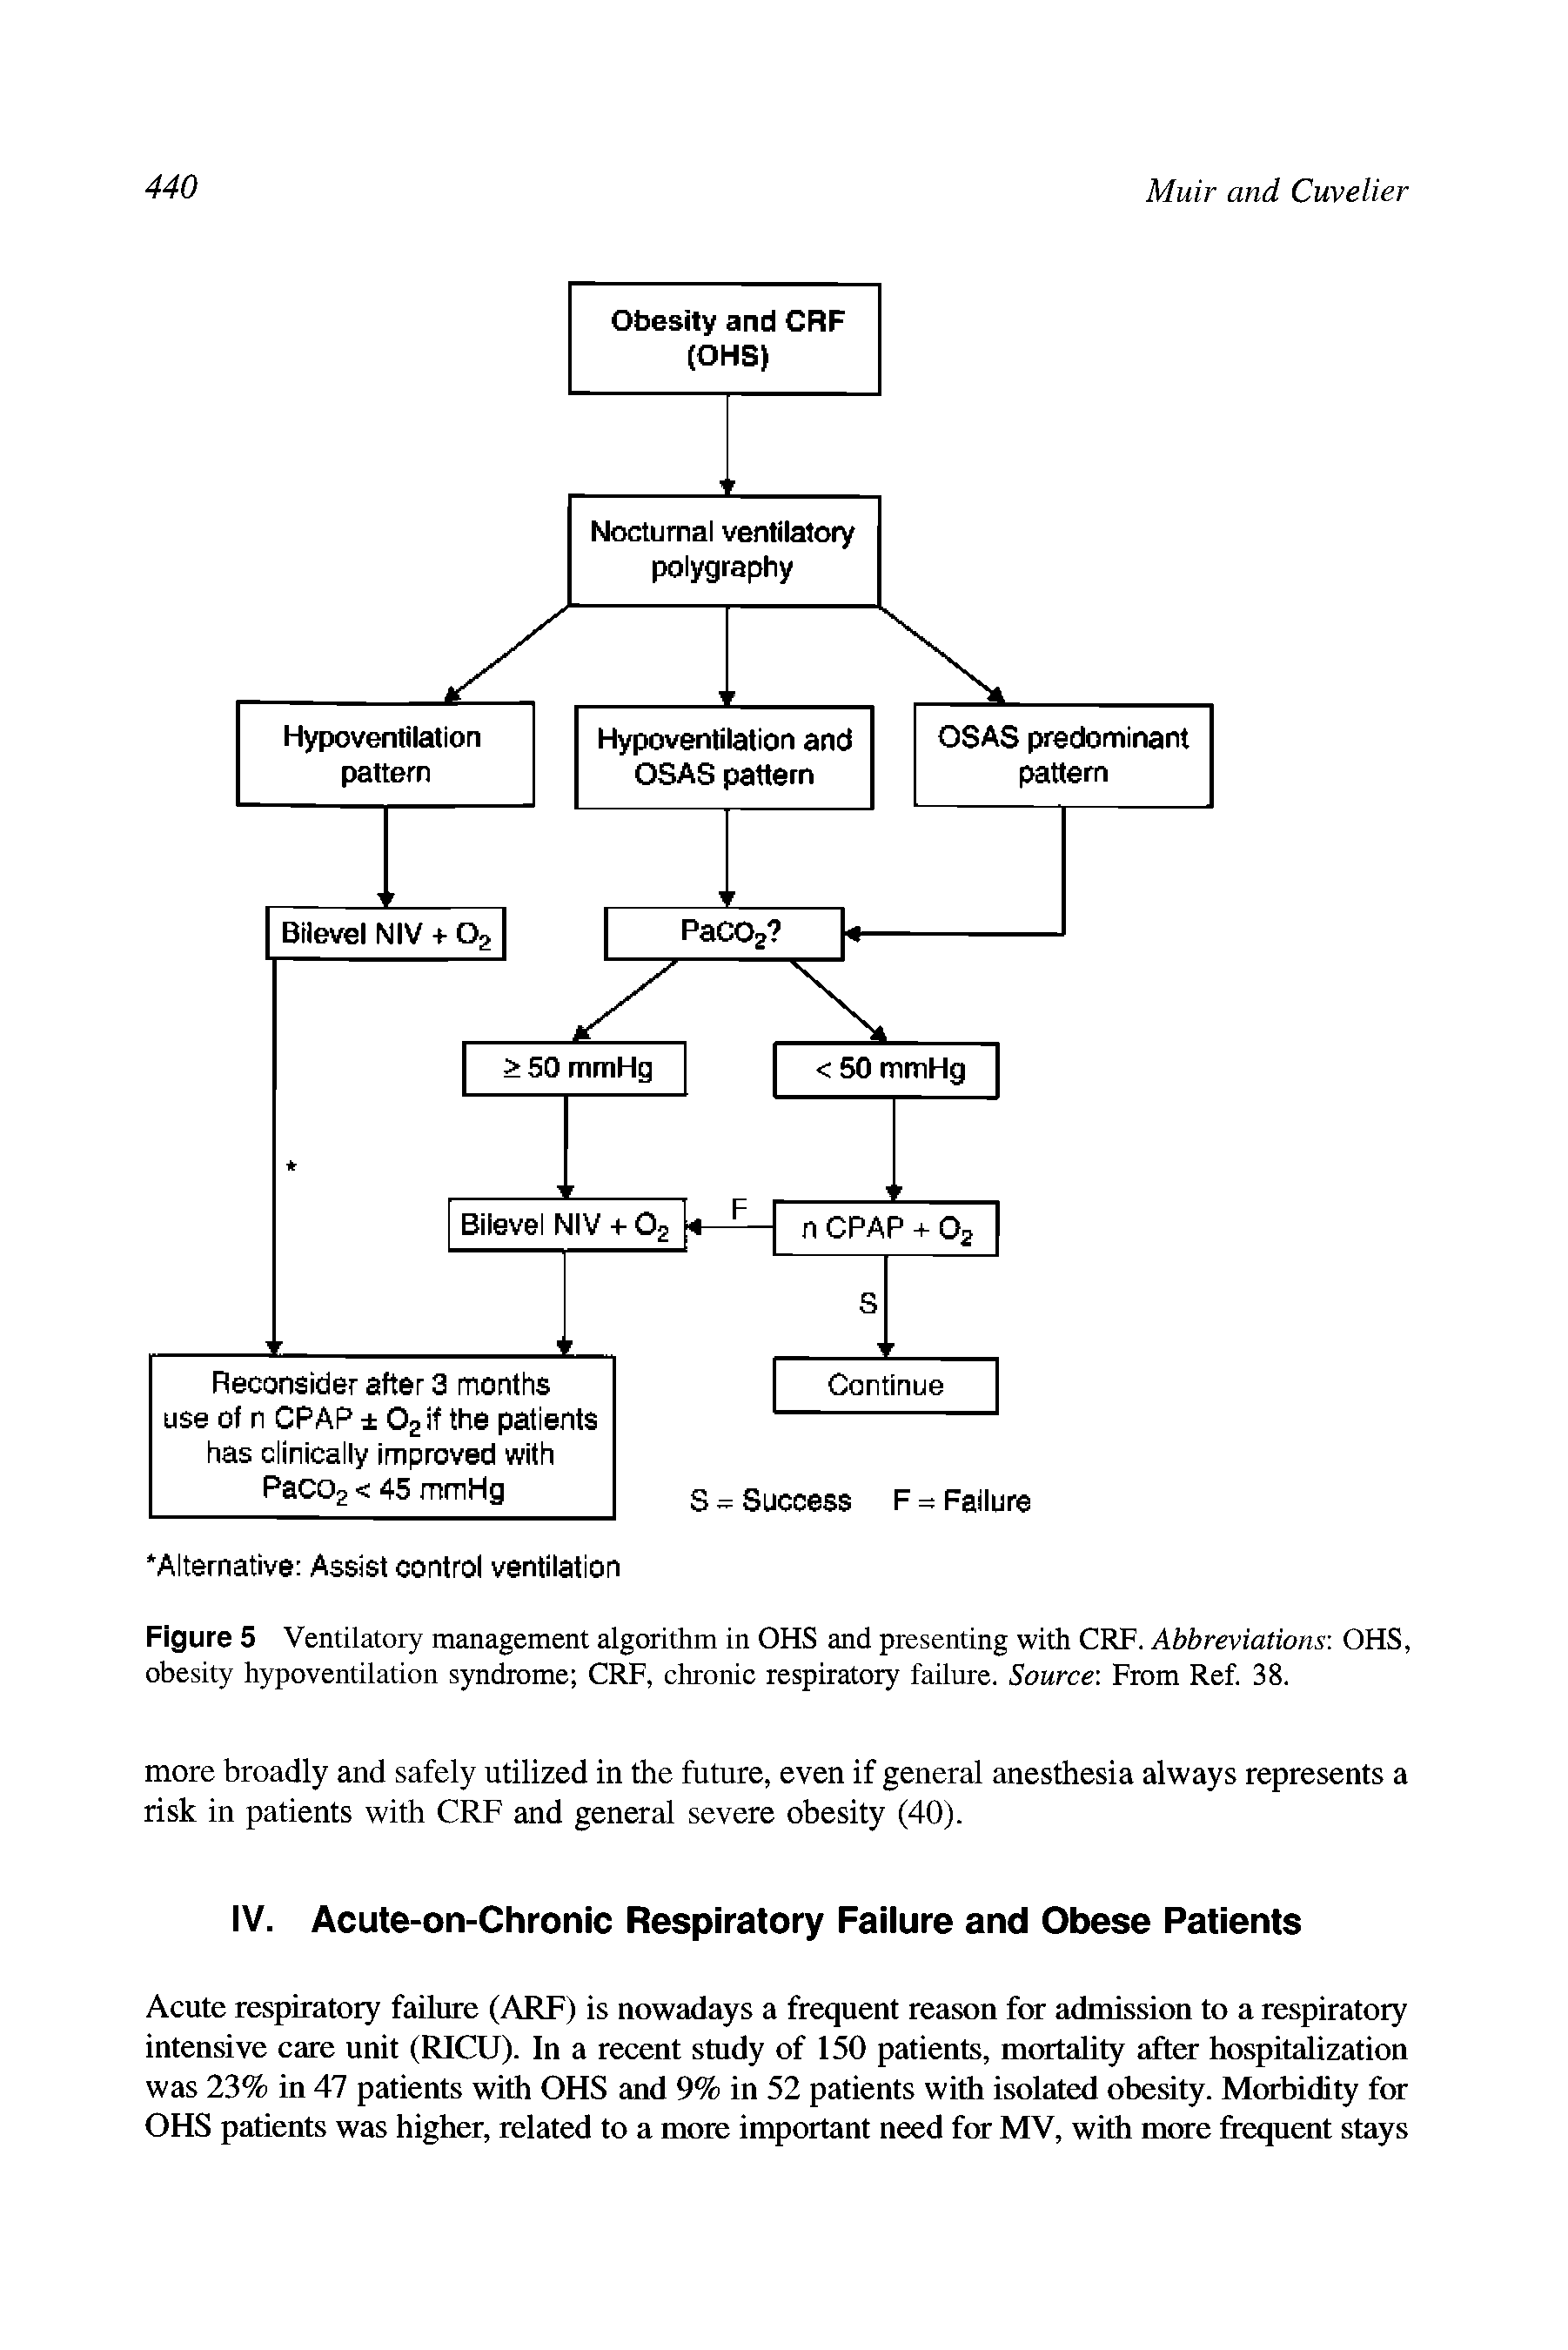 Figure 5 Ventilatory management algorithm in OHS and presenting with CRF. Abbreviations. OHS, obesity hypoventilation syndrome CRF, chronic respiratory failure. Source From Ref. 38.